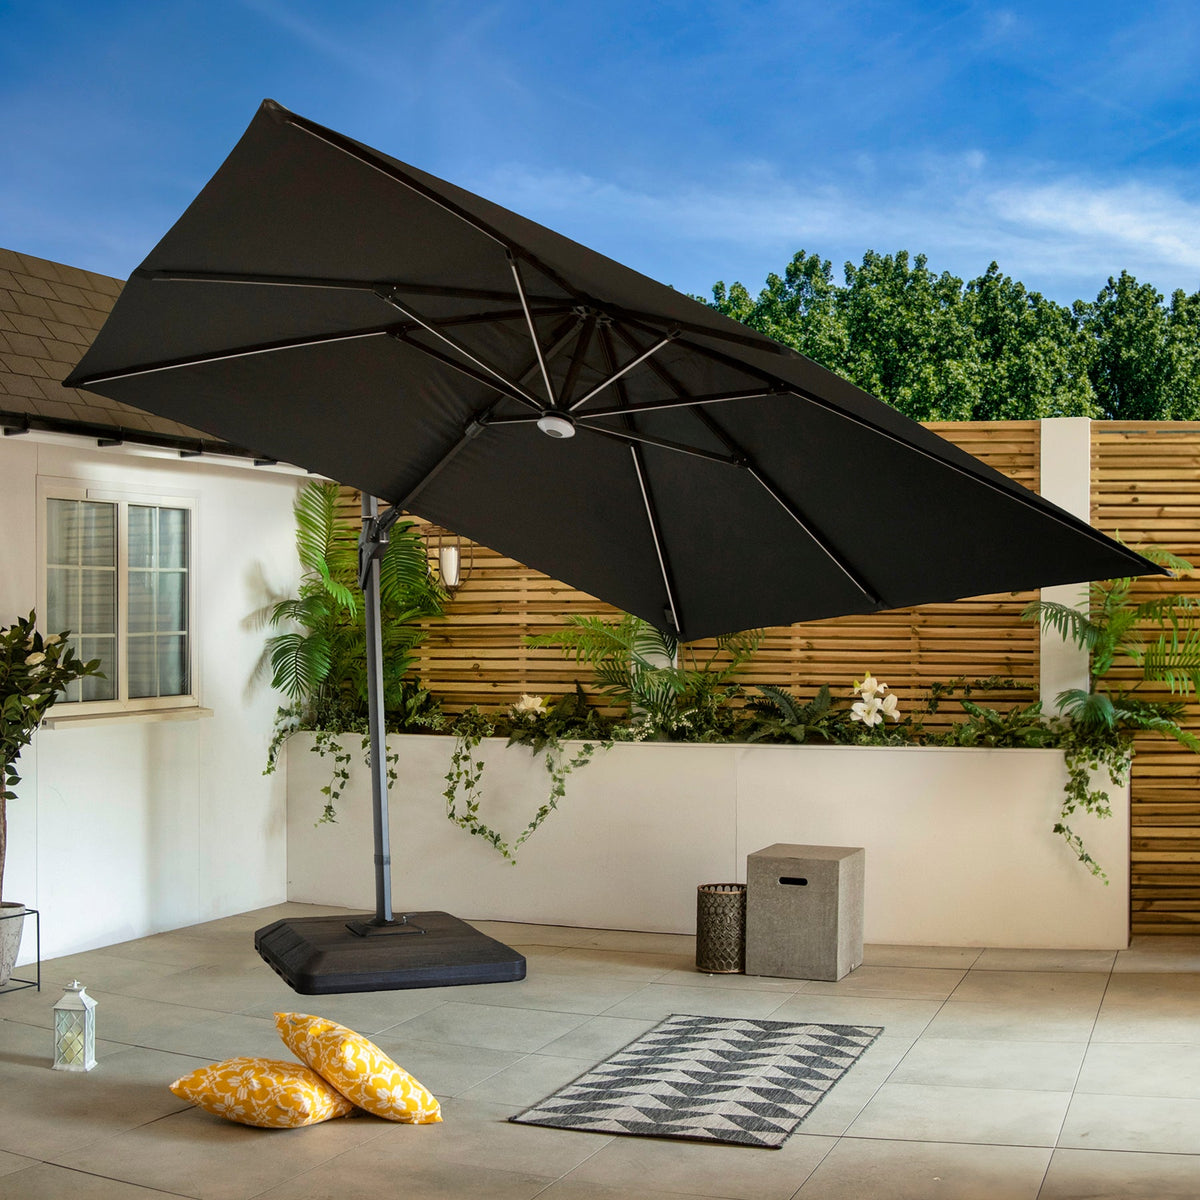 Bracken Outdoors Napoli Grey 3m x 3m Square Cantilever Parasol With LED Lights *Damaged Box*